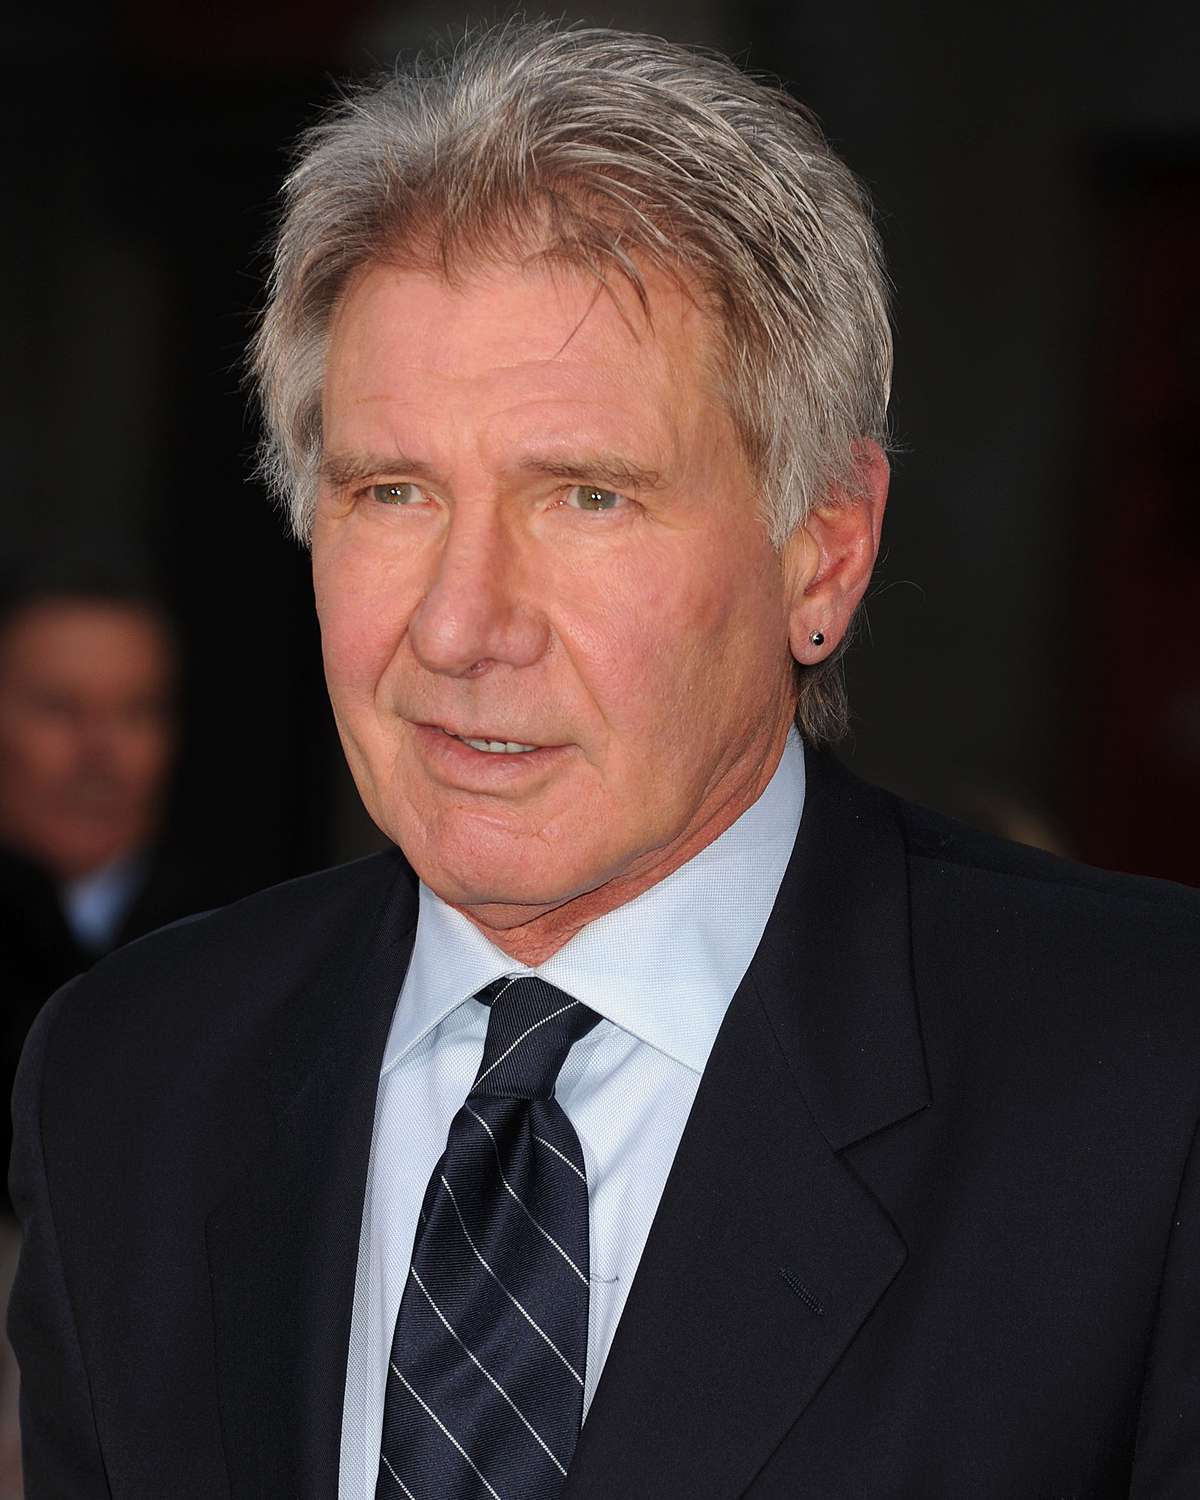 Actor Harrison Ford attends the '42' Los Angeles premiere at TCL Chinese Theatre on April 9, 2013